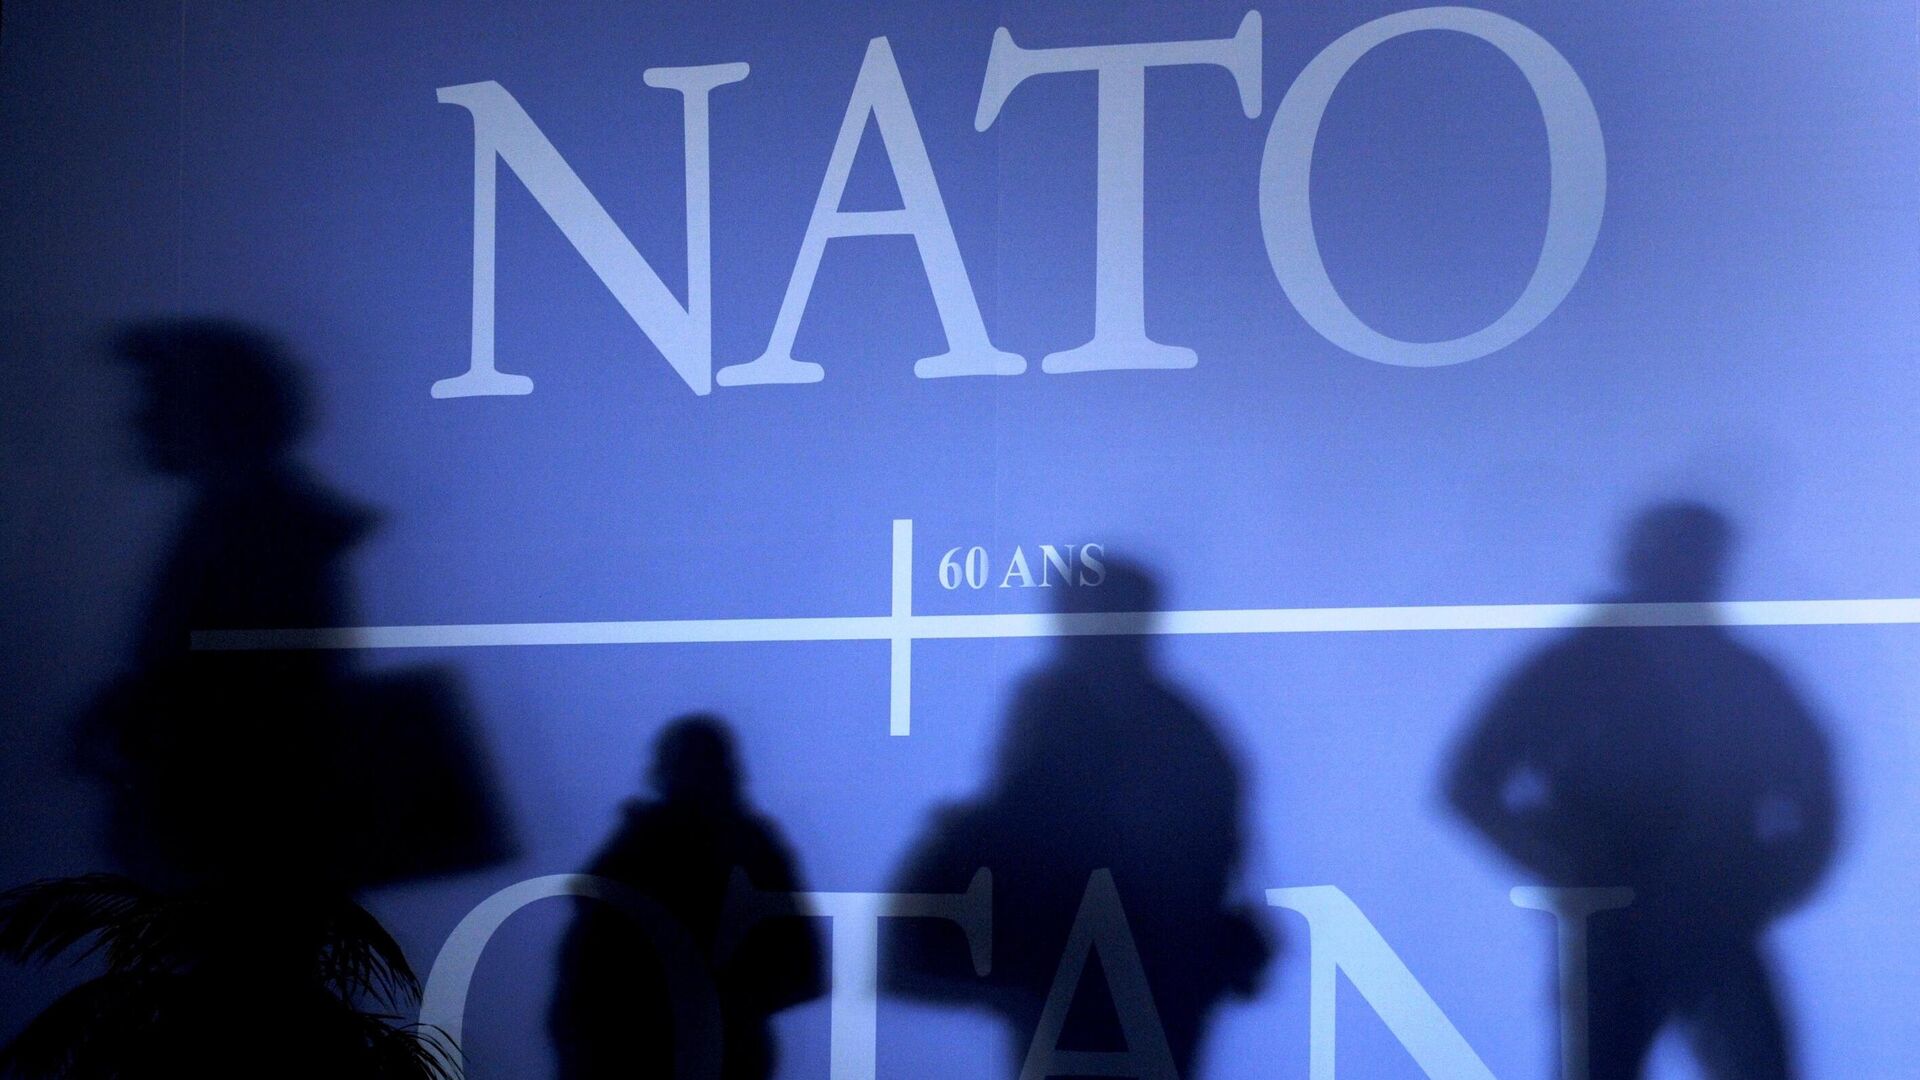 This April 2, 2009 file photo shows shadows cast on a wall decorated with the NATO logo and flags of NATO countries in Strasbourg, eastern France, before the start of the NATO summit which marked the organisation's 60th anniversary.  - Sputnik International, 1920, 18.03.2023